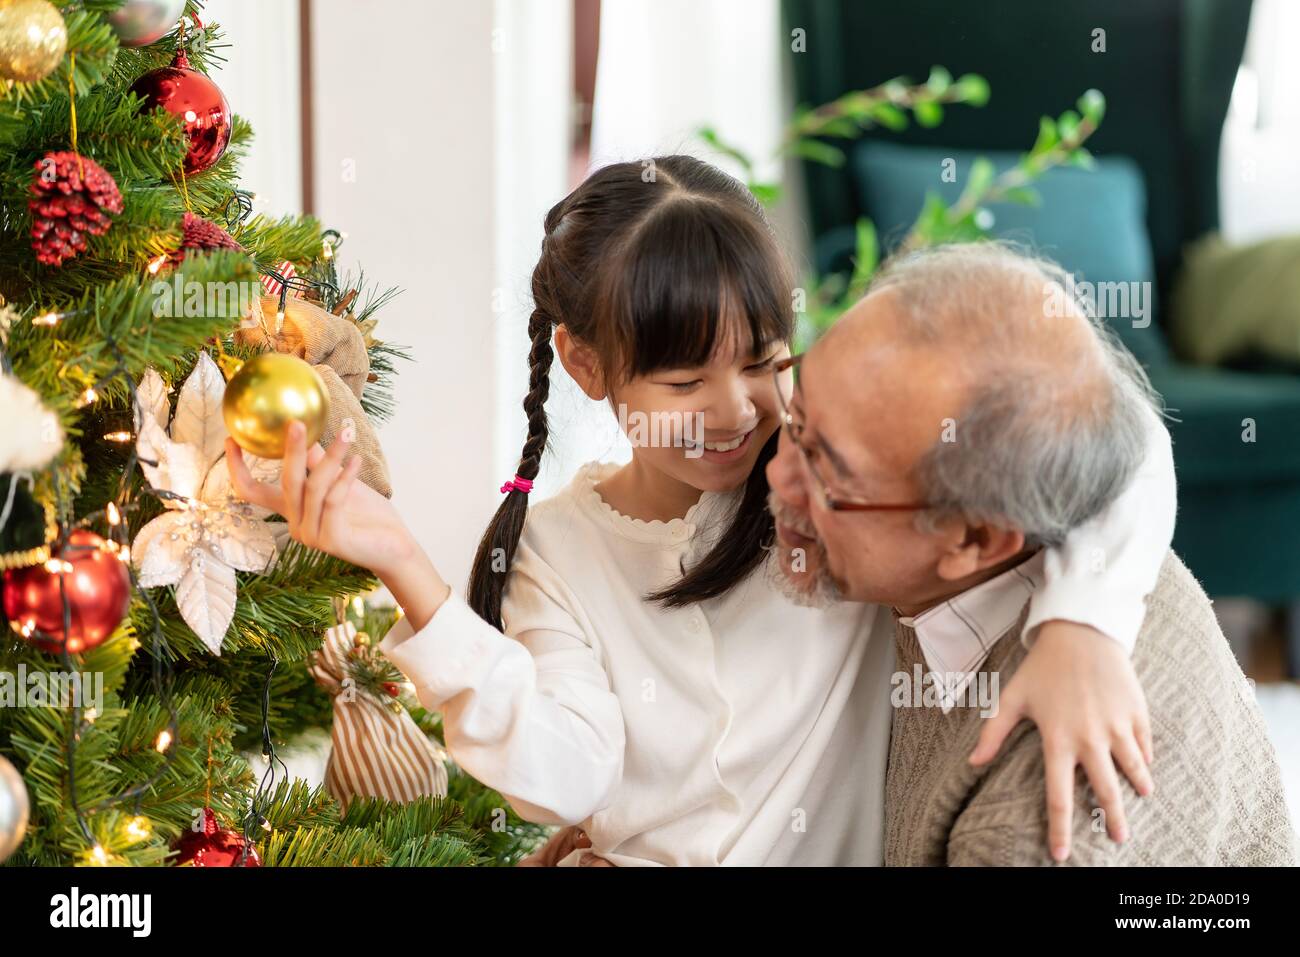 Little girl decorating a Christmas tree with her grandfather. They decorating the Christmas tree prepare for season greeting of Merry Christmas. Multi Stock Photo